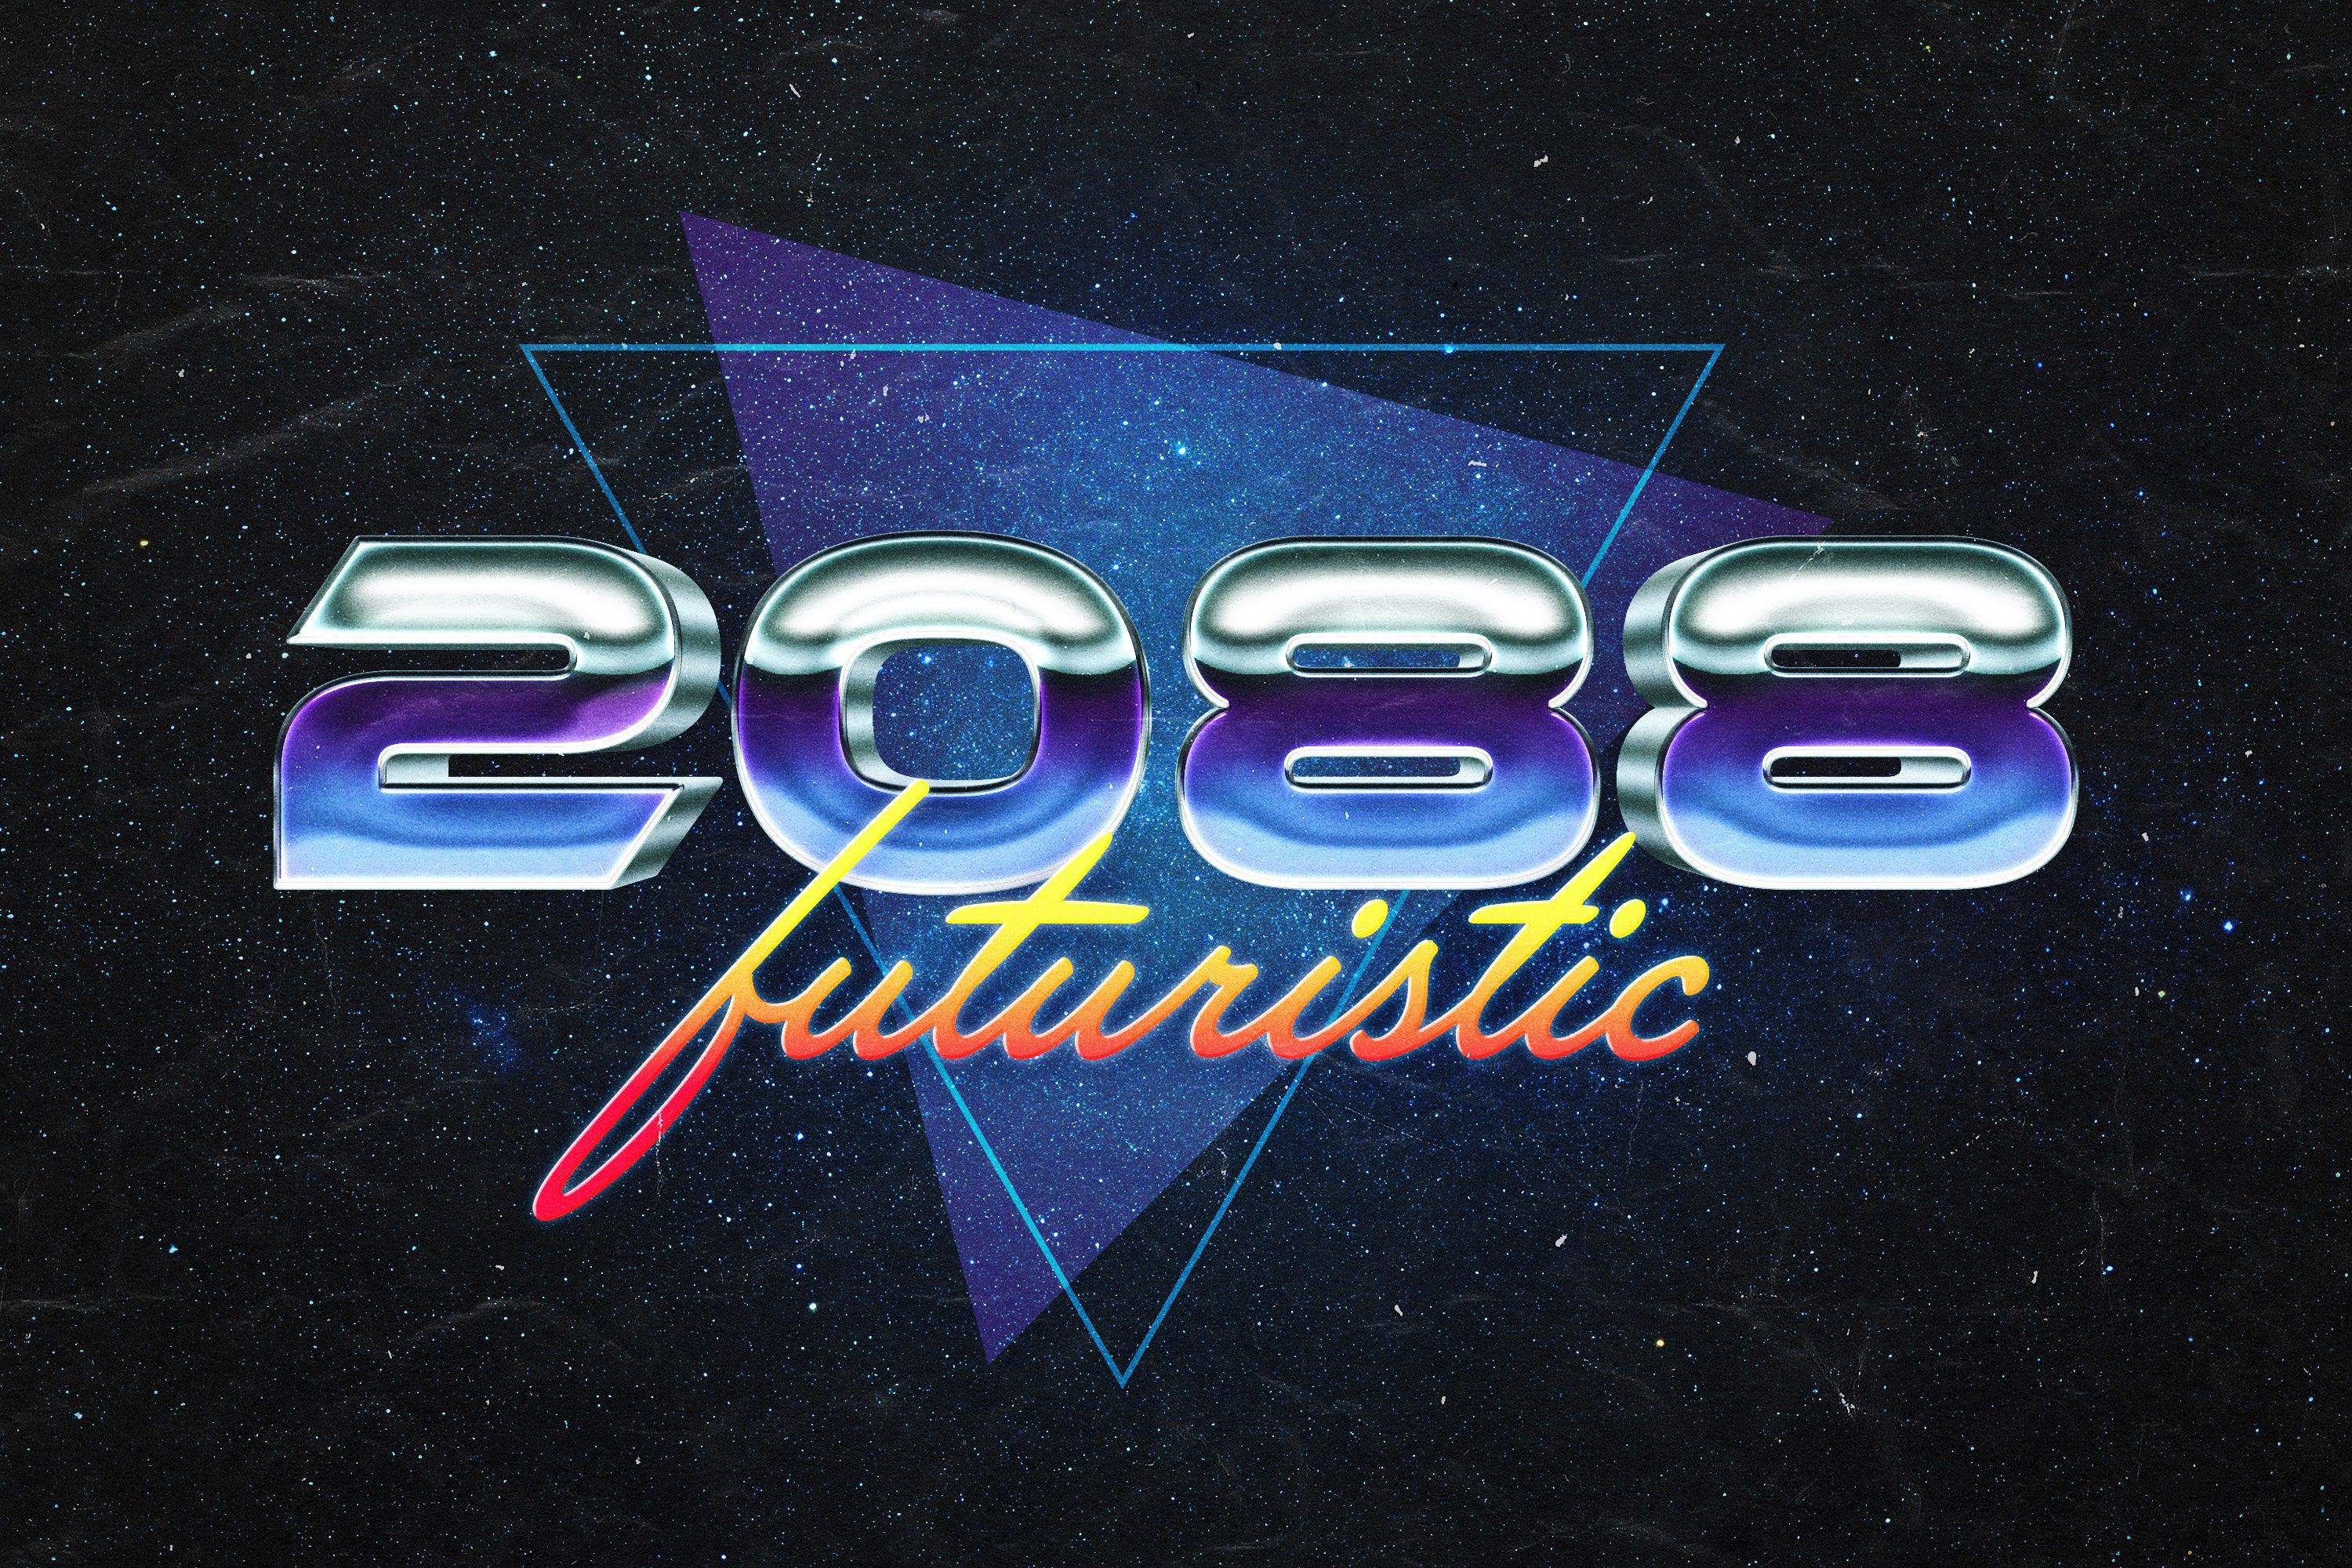 80s Text Effects Collection